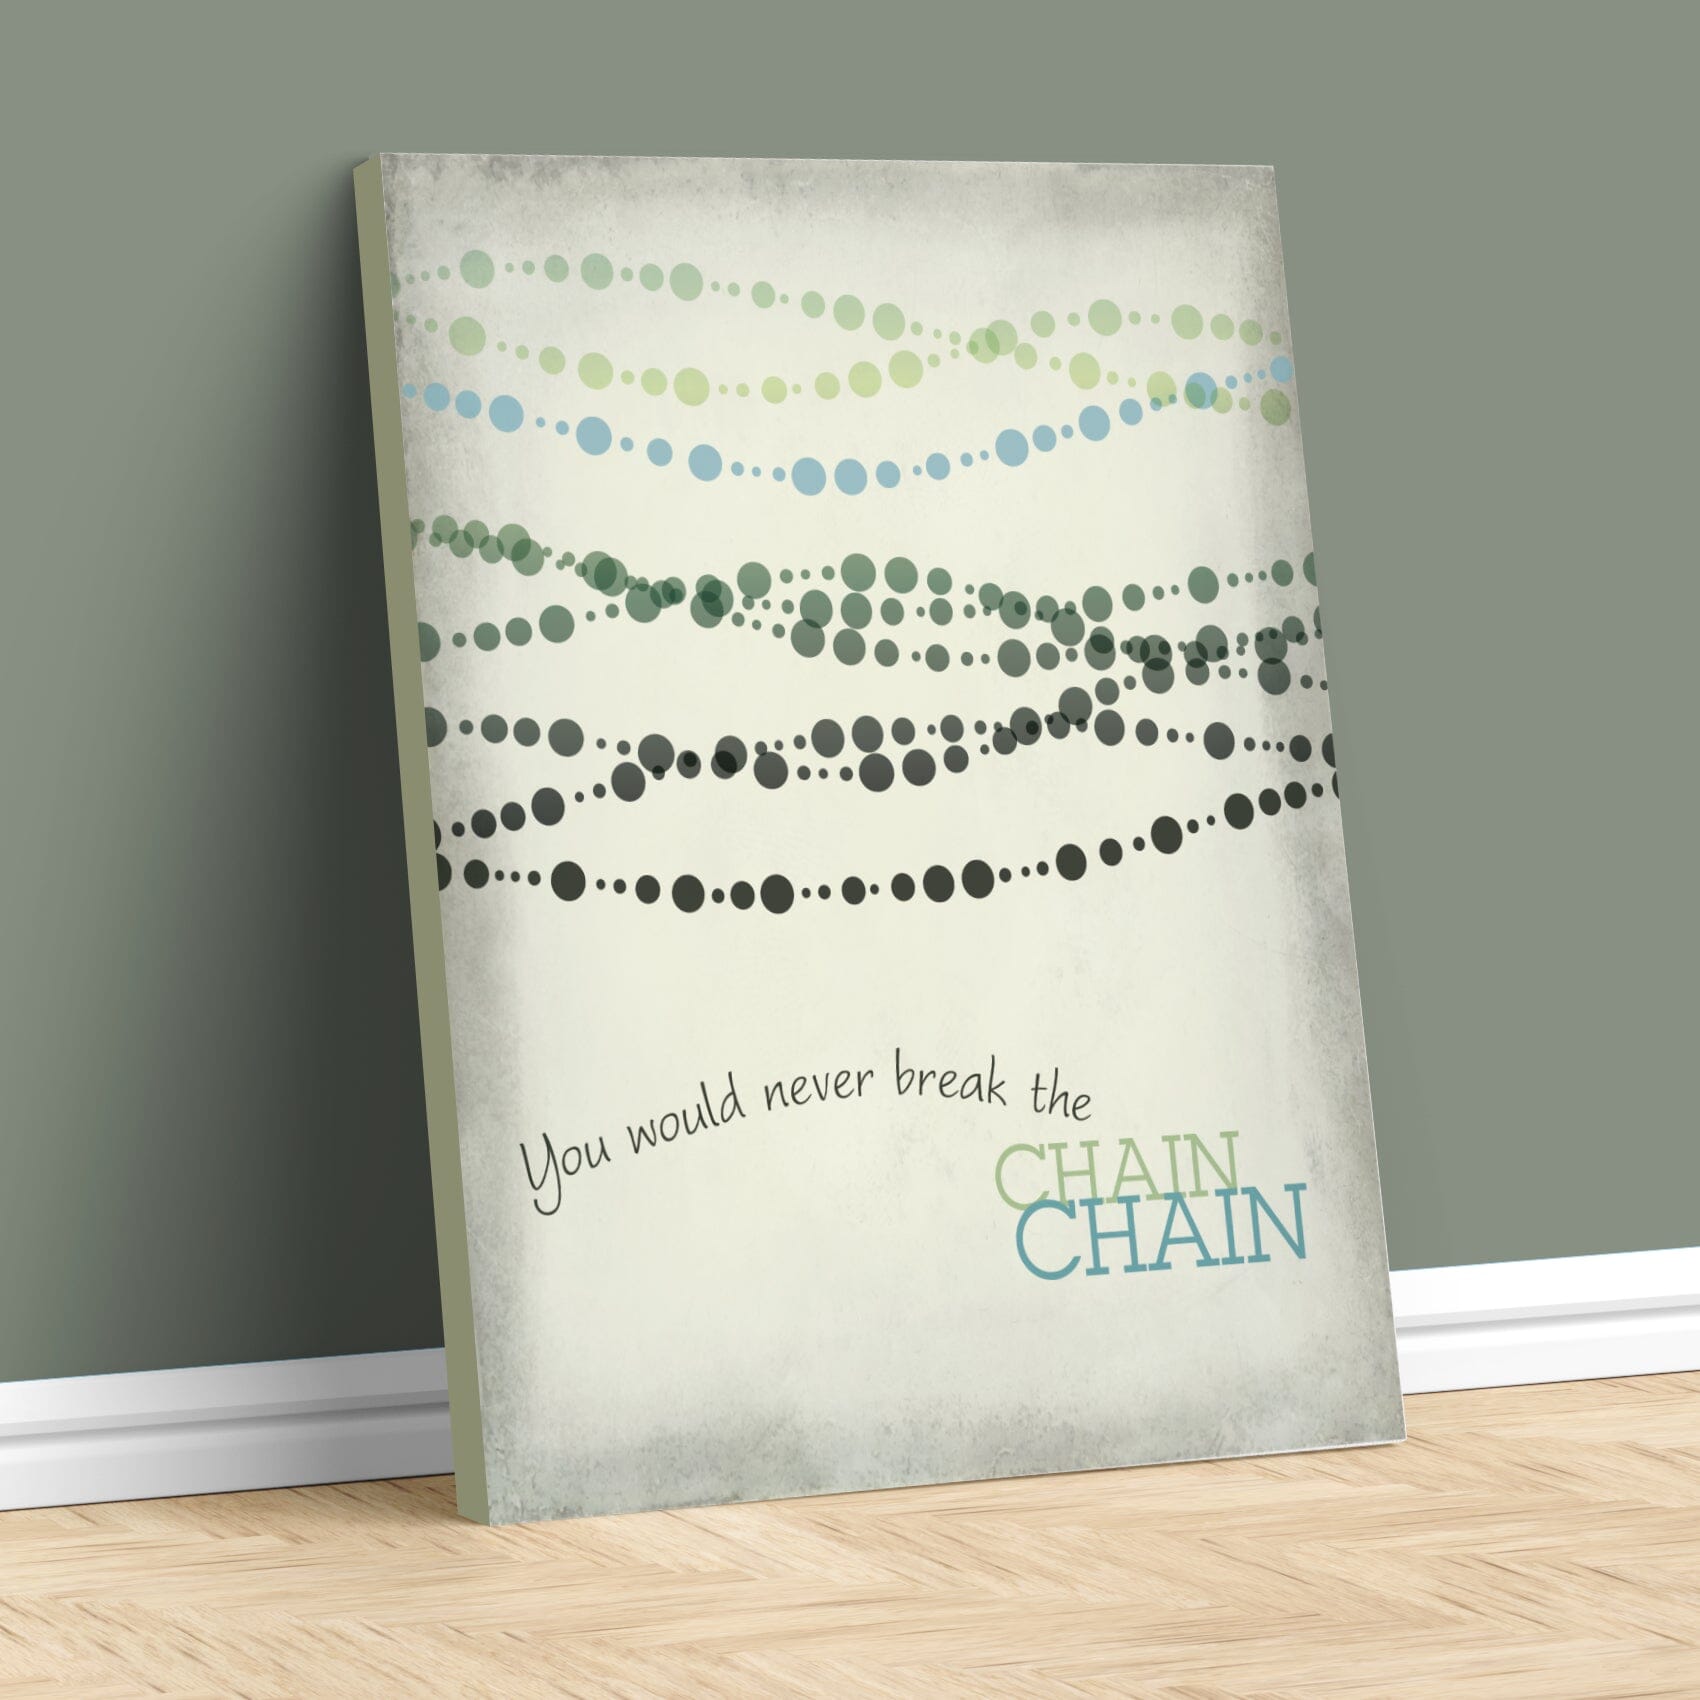 The Chain by Fleetwood Mac - Rock Music Song Lyric Print Song Lyrics Art Song Lyrics Art 11x14 Canvas Wrap 